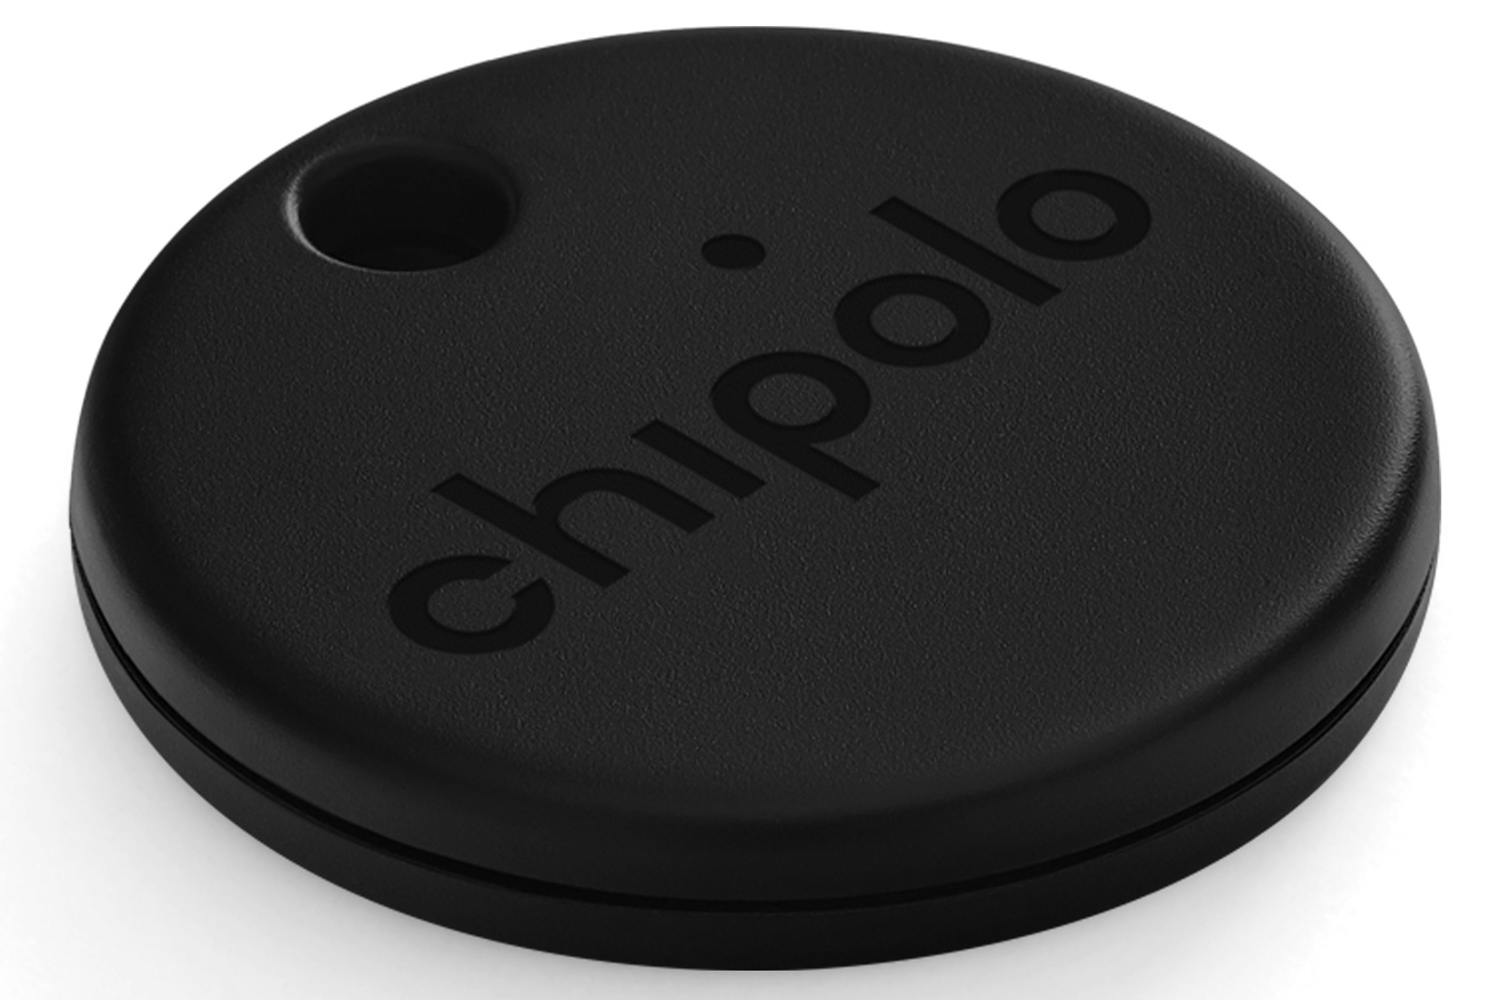 Chipolo One Bluetooth Item Finder | Black